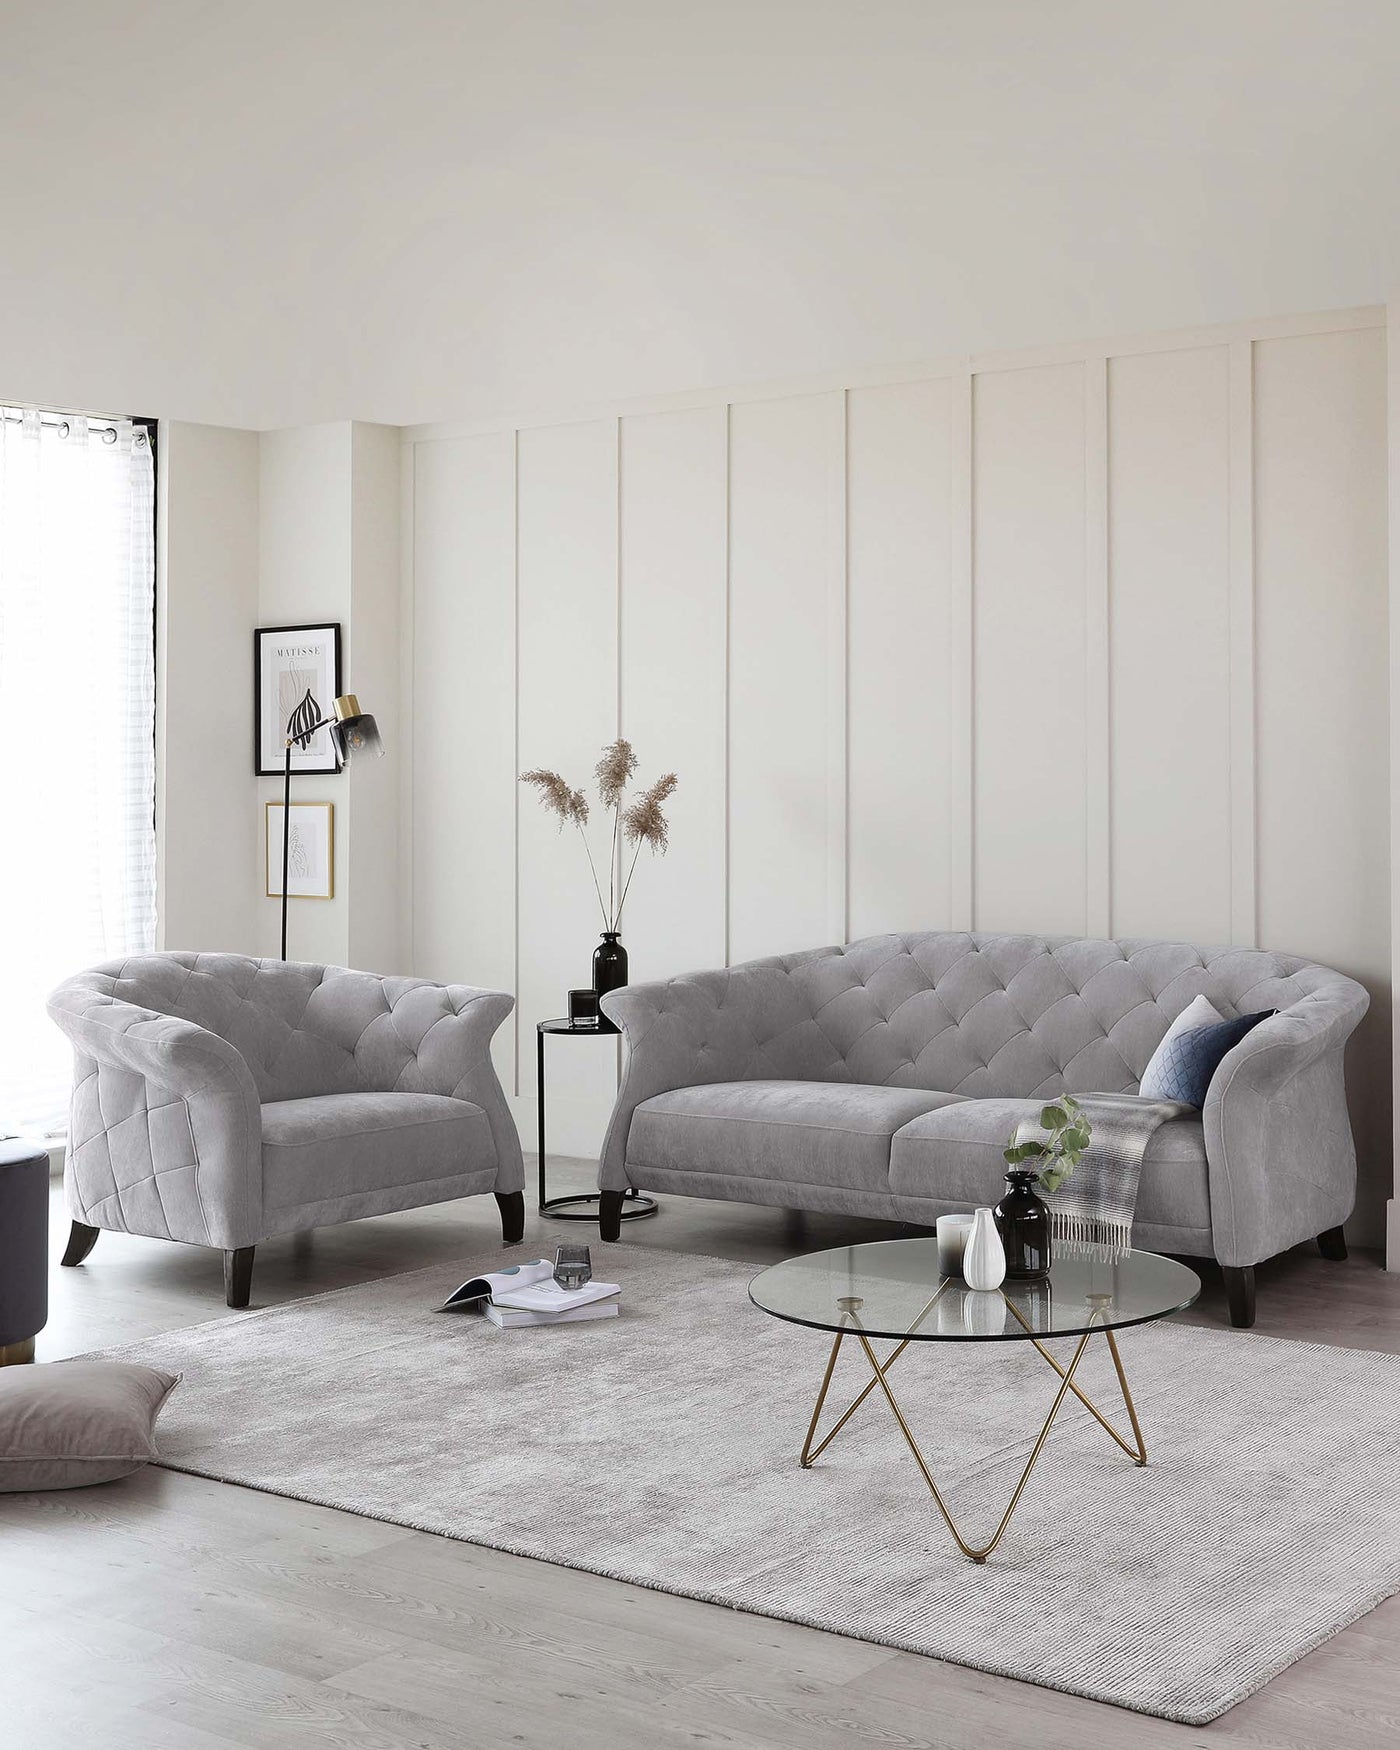 Elegant living room featuring a grey tufted sofa with a curved back, complemented by a matching tufted accent armchair. A round coffee table with a glass top and unique gold-coloured metal base is centred on a textured light grey area rug.